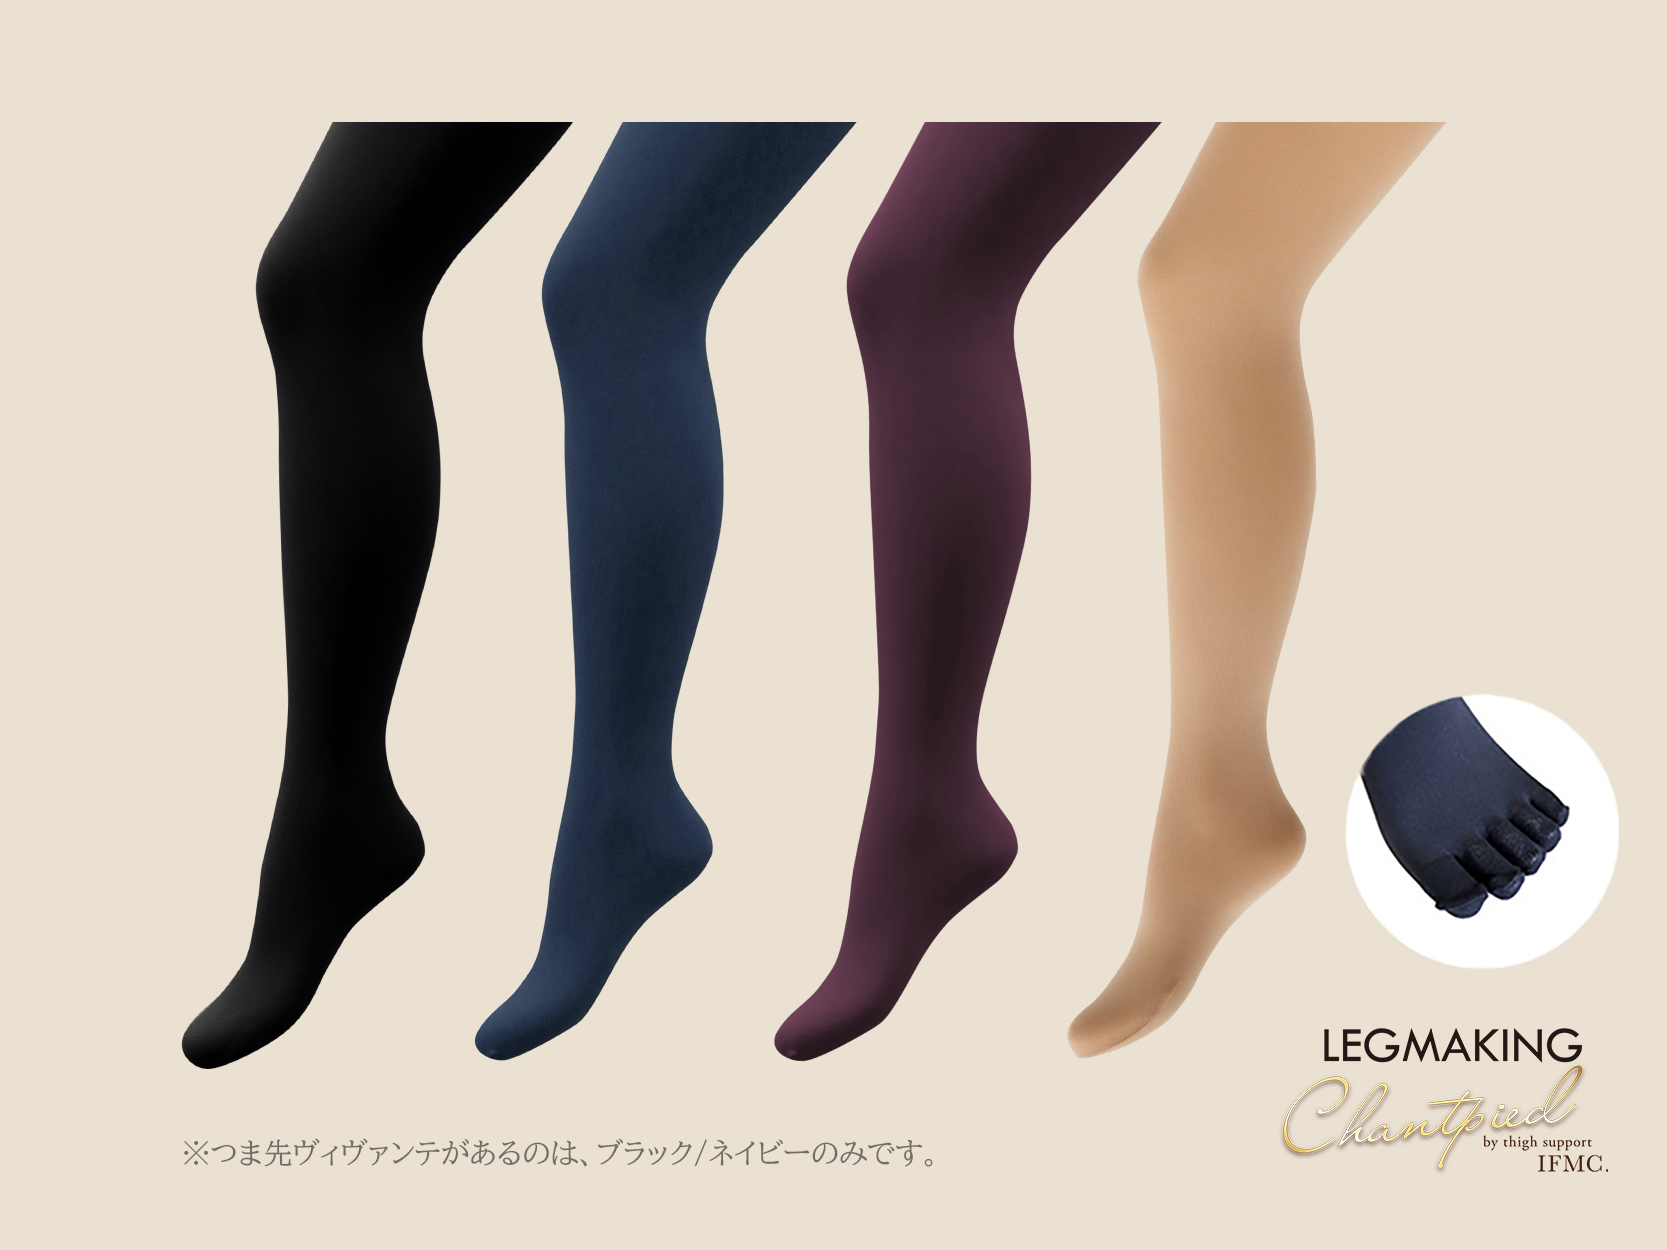 LEGMAKING Chantpied by thigh support IFMC. レッグメイキングシャンピエbyサイサポート イフミック